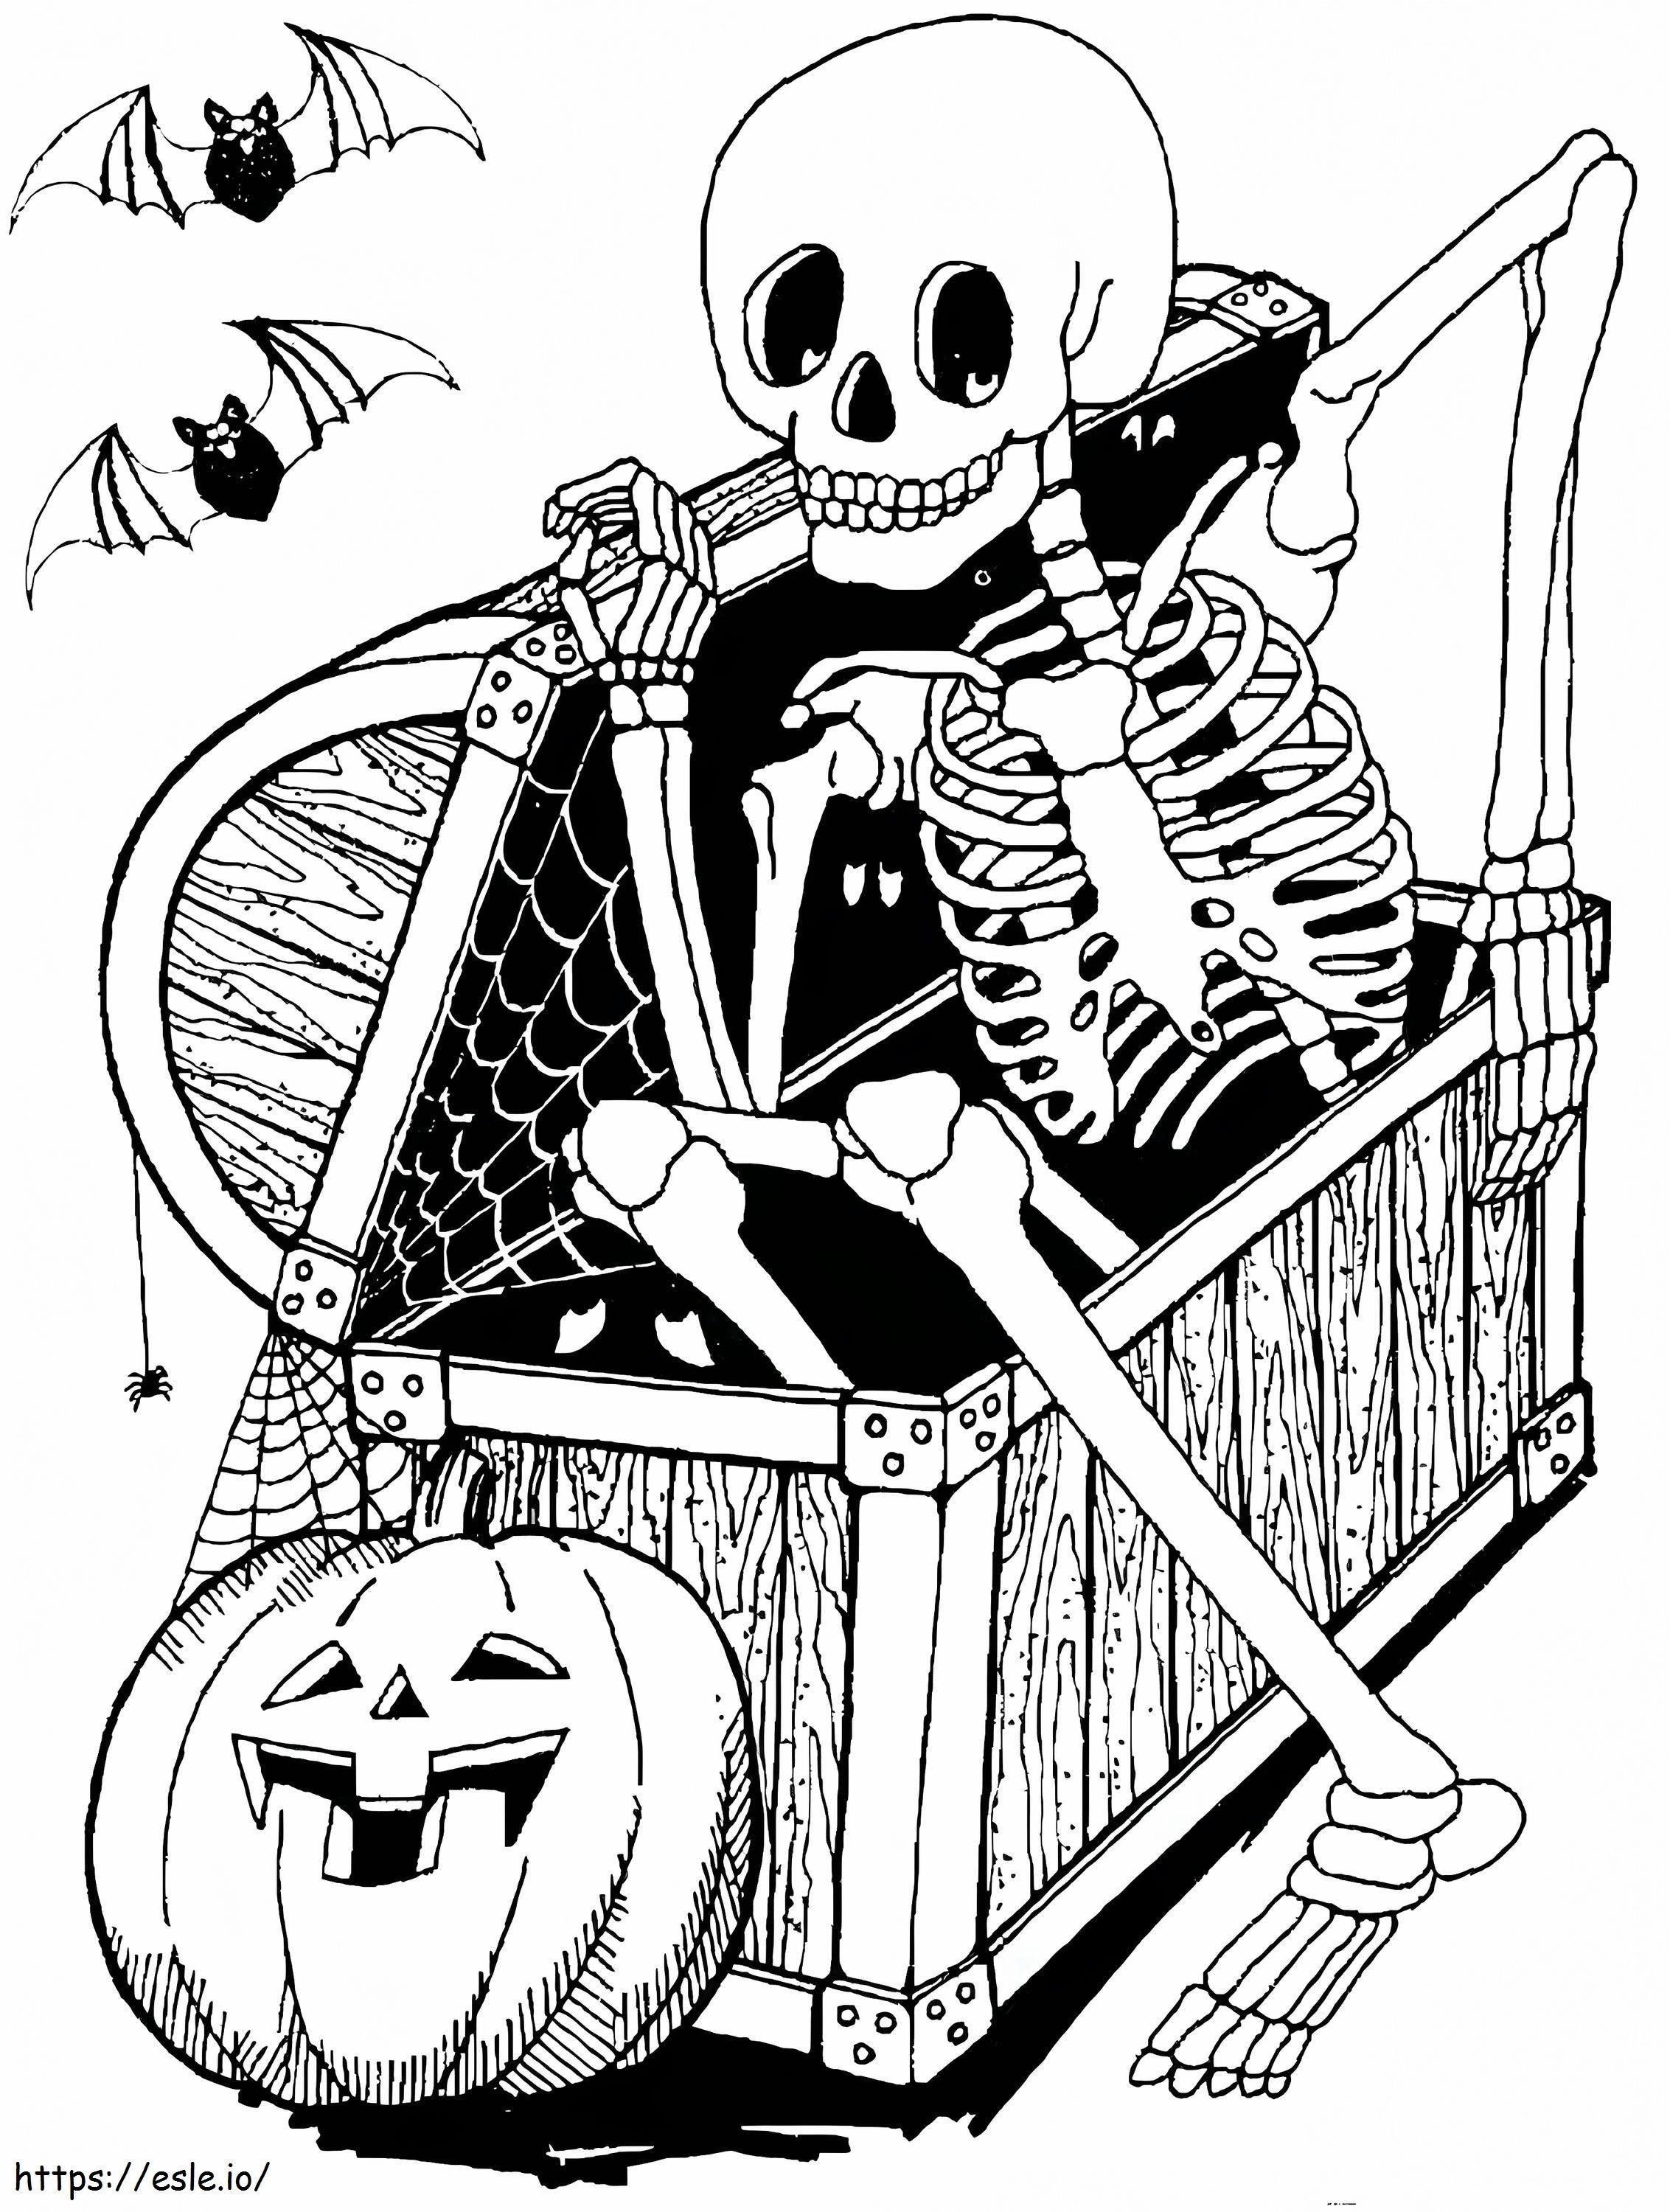 1540354344 Skeleton Book 2 A For Adults Dinosaur Colouring Of Human coloring page